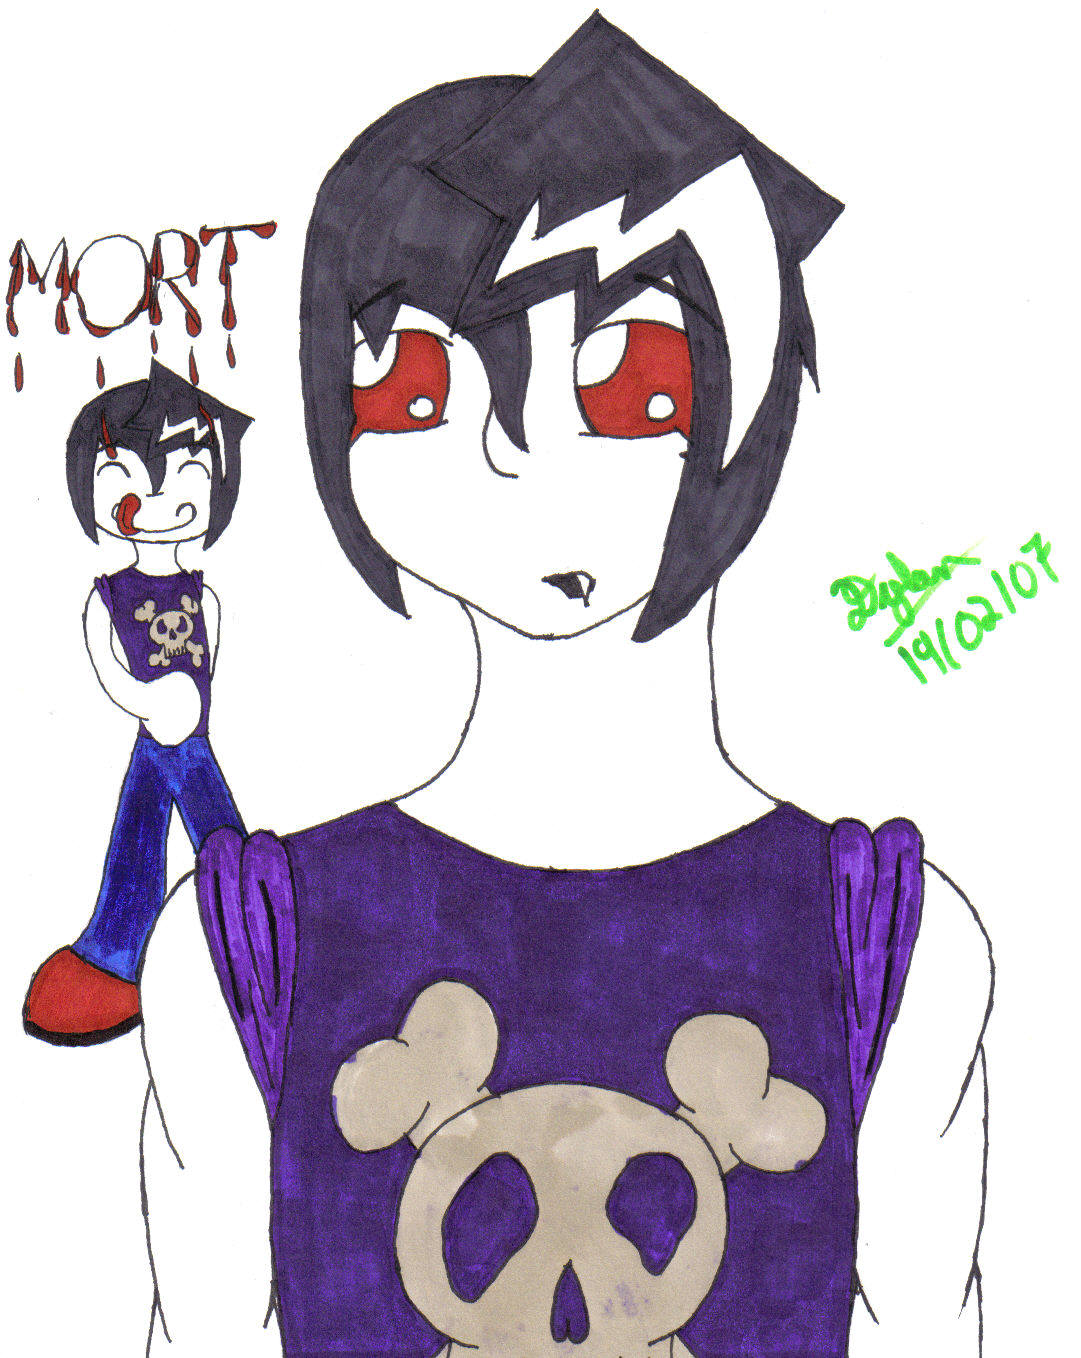 Mort by DeAtH_fIrE